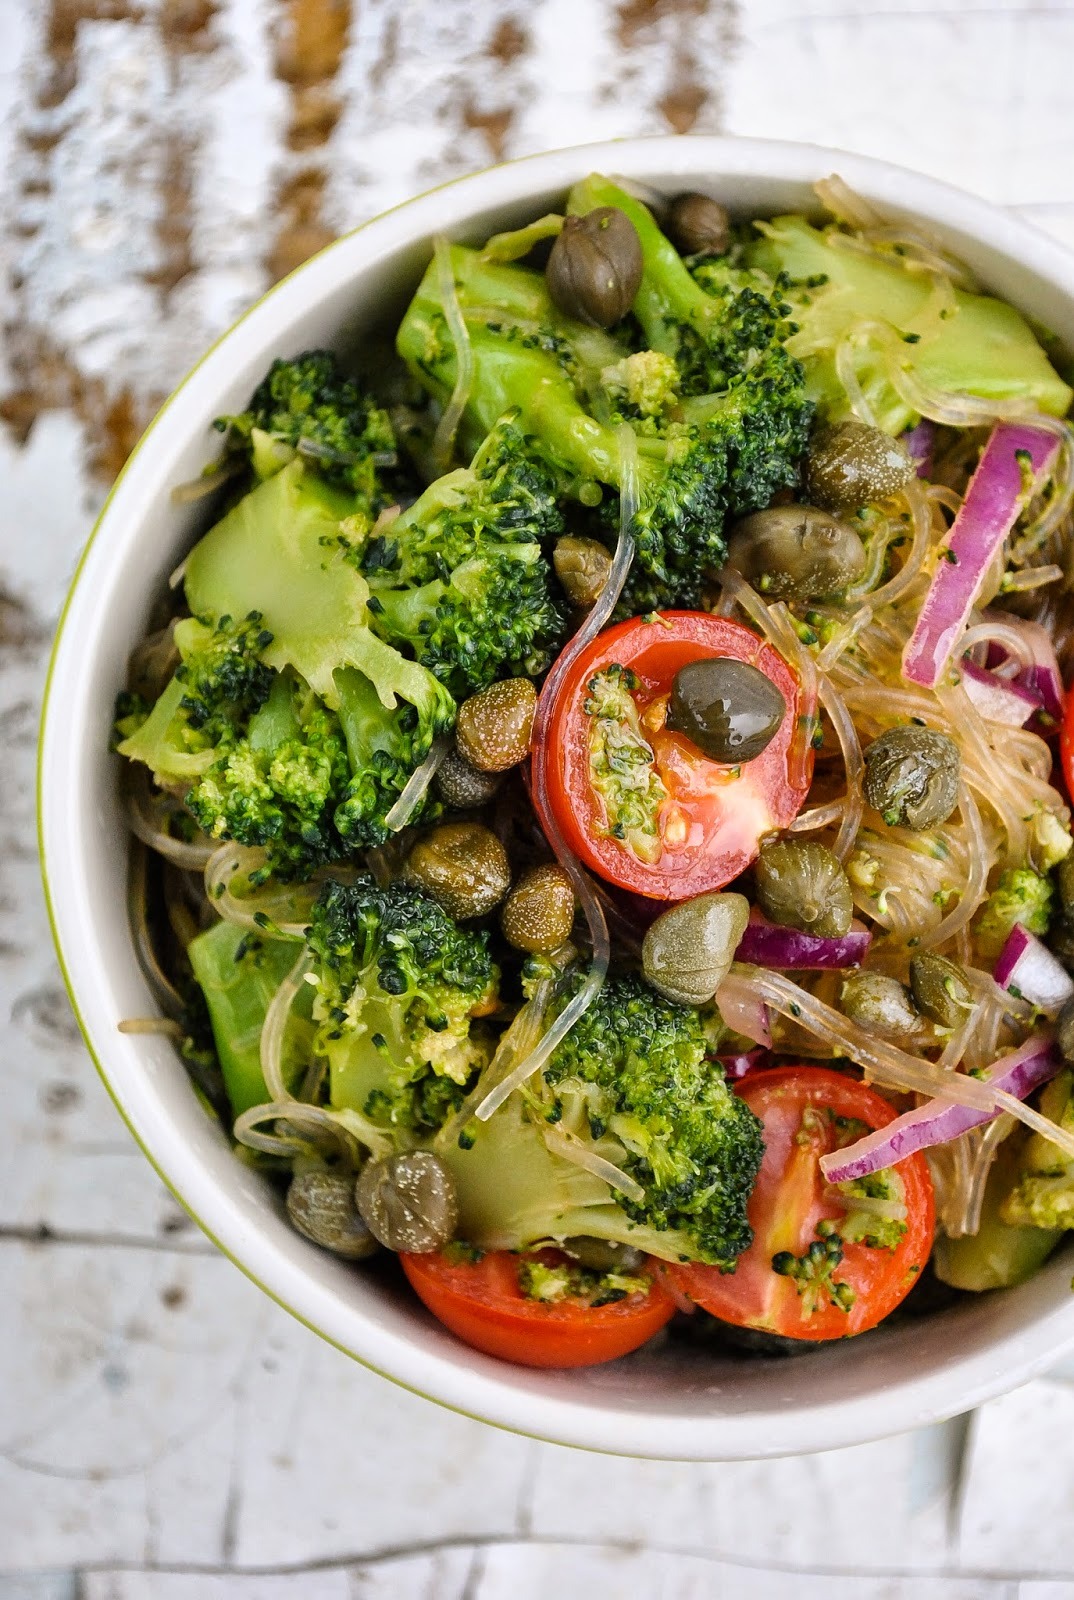 (via Broccoli and noodle salad with capers VeganSandra tasty, cheap and easy vegan recipes by Sandra Vungi)